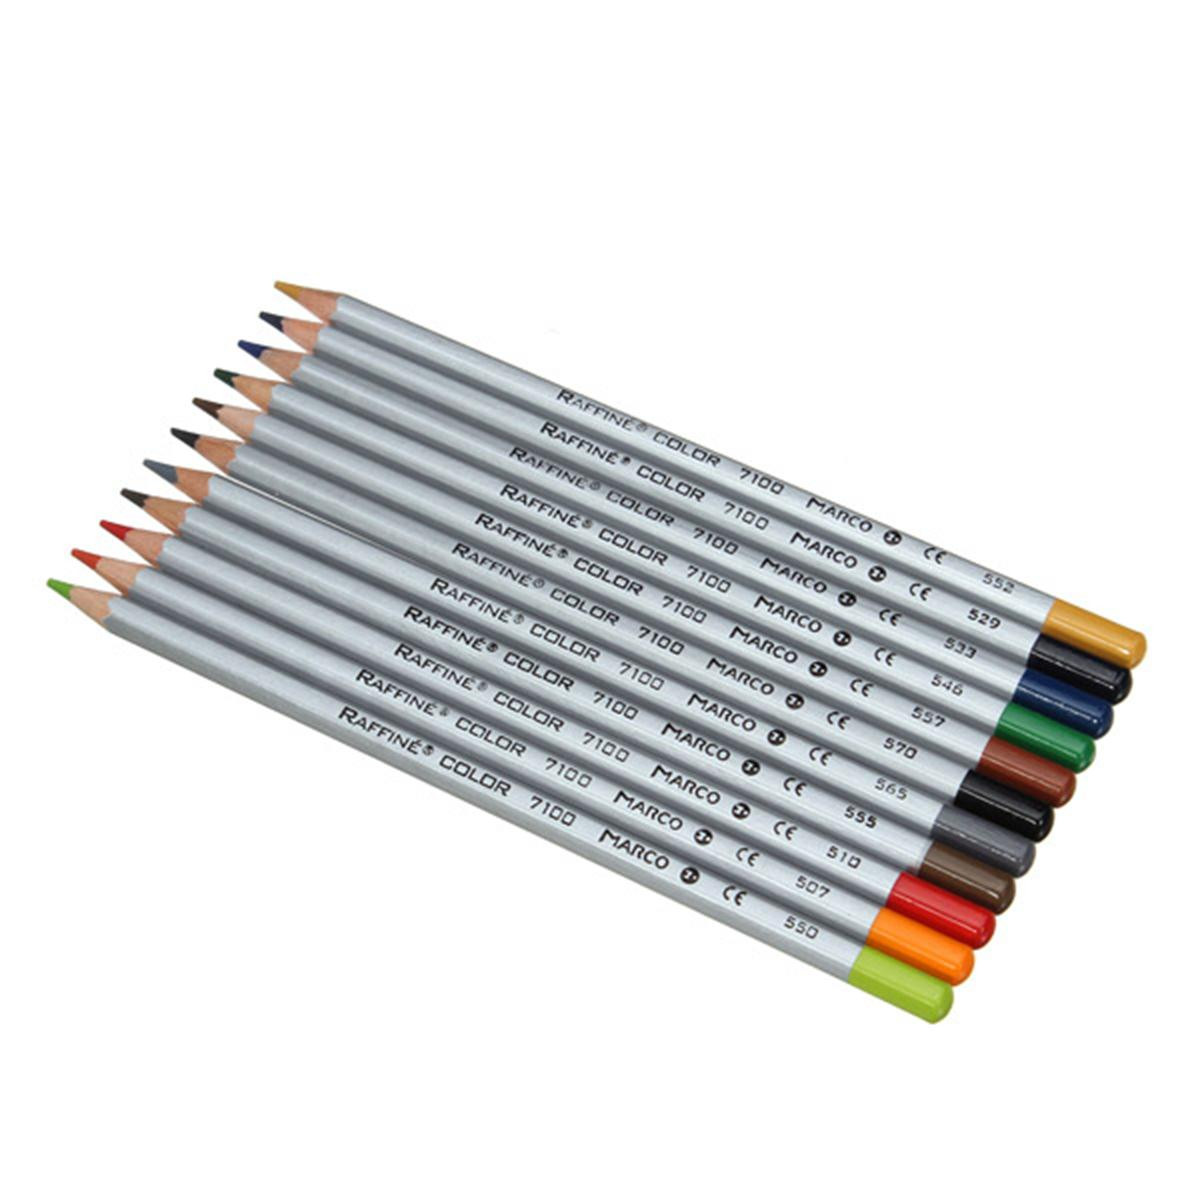 72-Colors-Art-Drawing-Pencil-Set-Oil-Non-toxic-Pencils-Painting-Sketching-Drawing-Stationery-School--973251-8